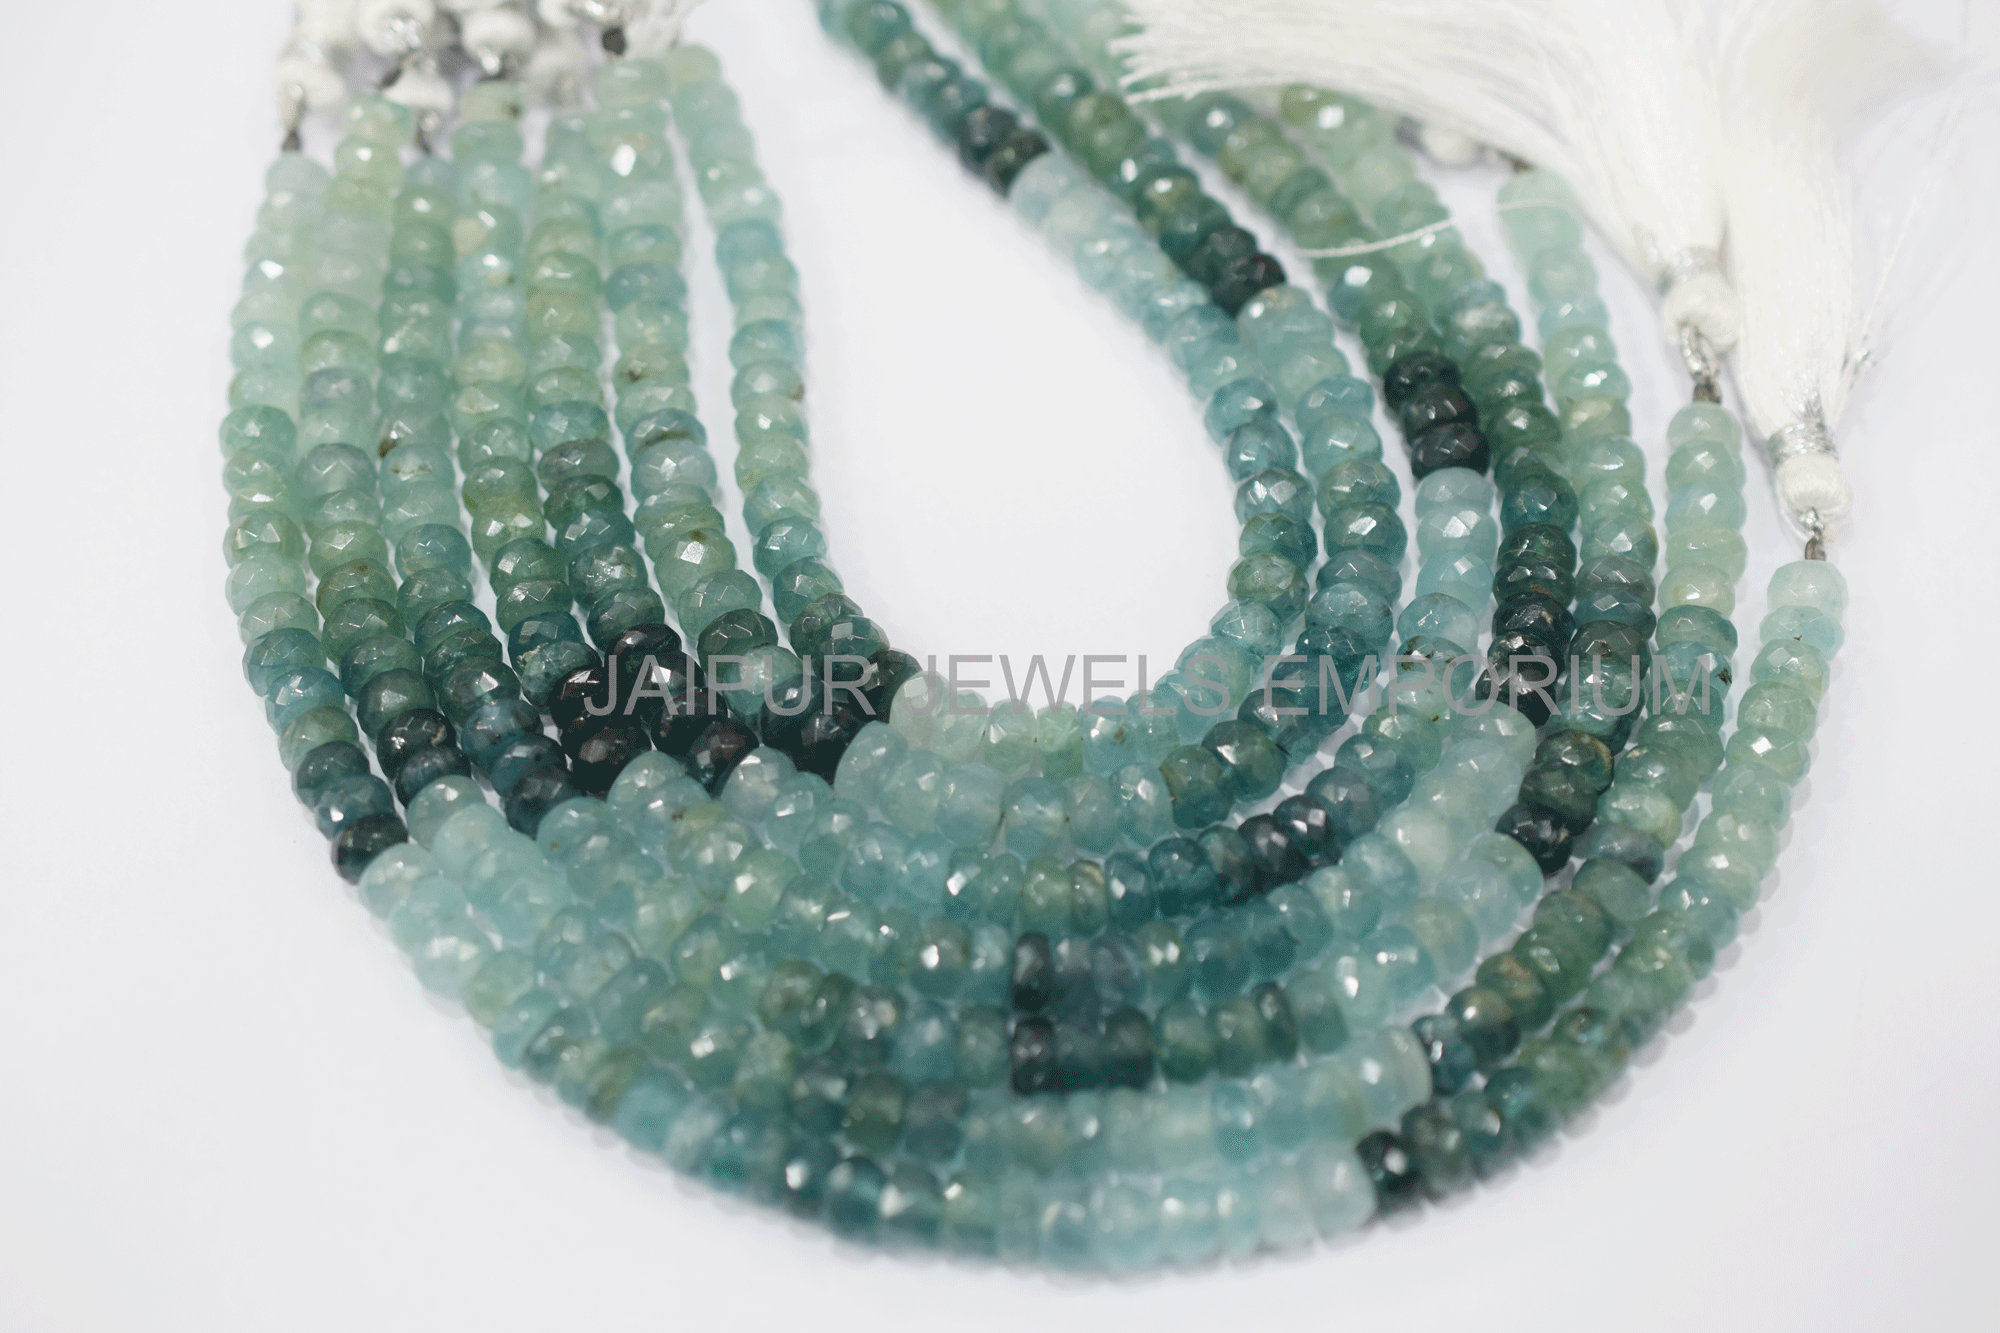 BL55JJE59 Grandidierite Rondelle Beads 4.25-4.5 mm Pack of 2 Strands Grandidierite Faceted Beads Sold By Pack 8 inches